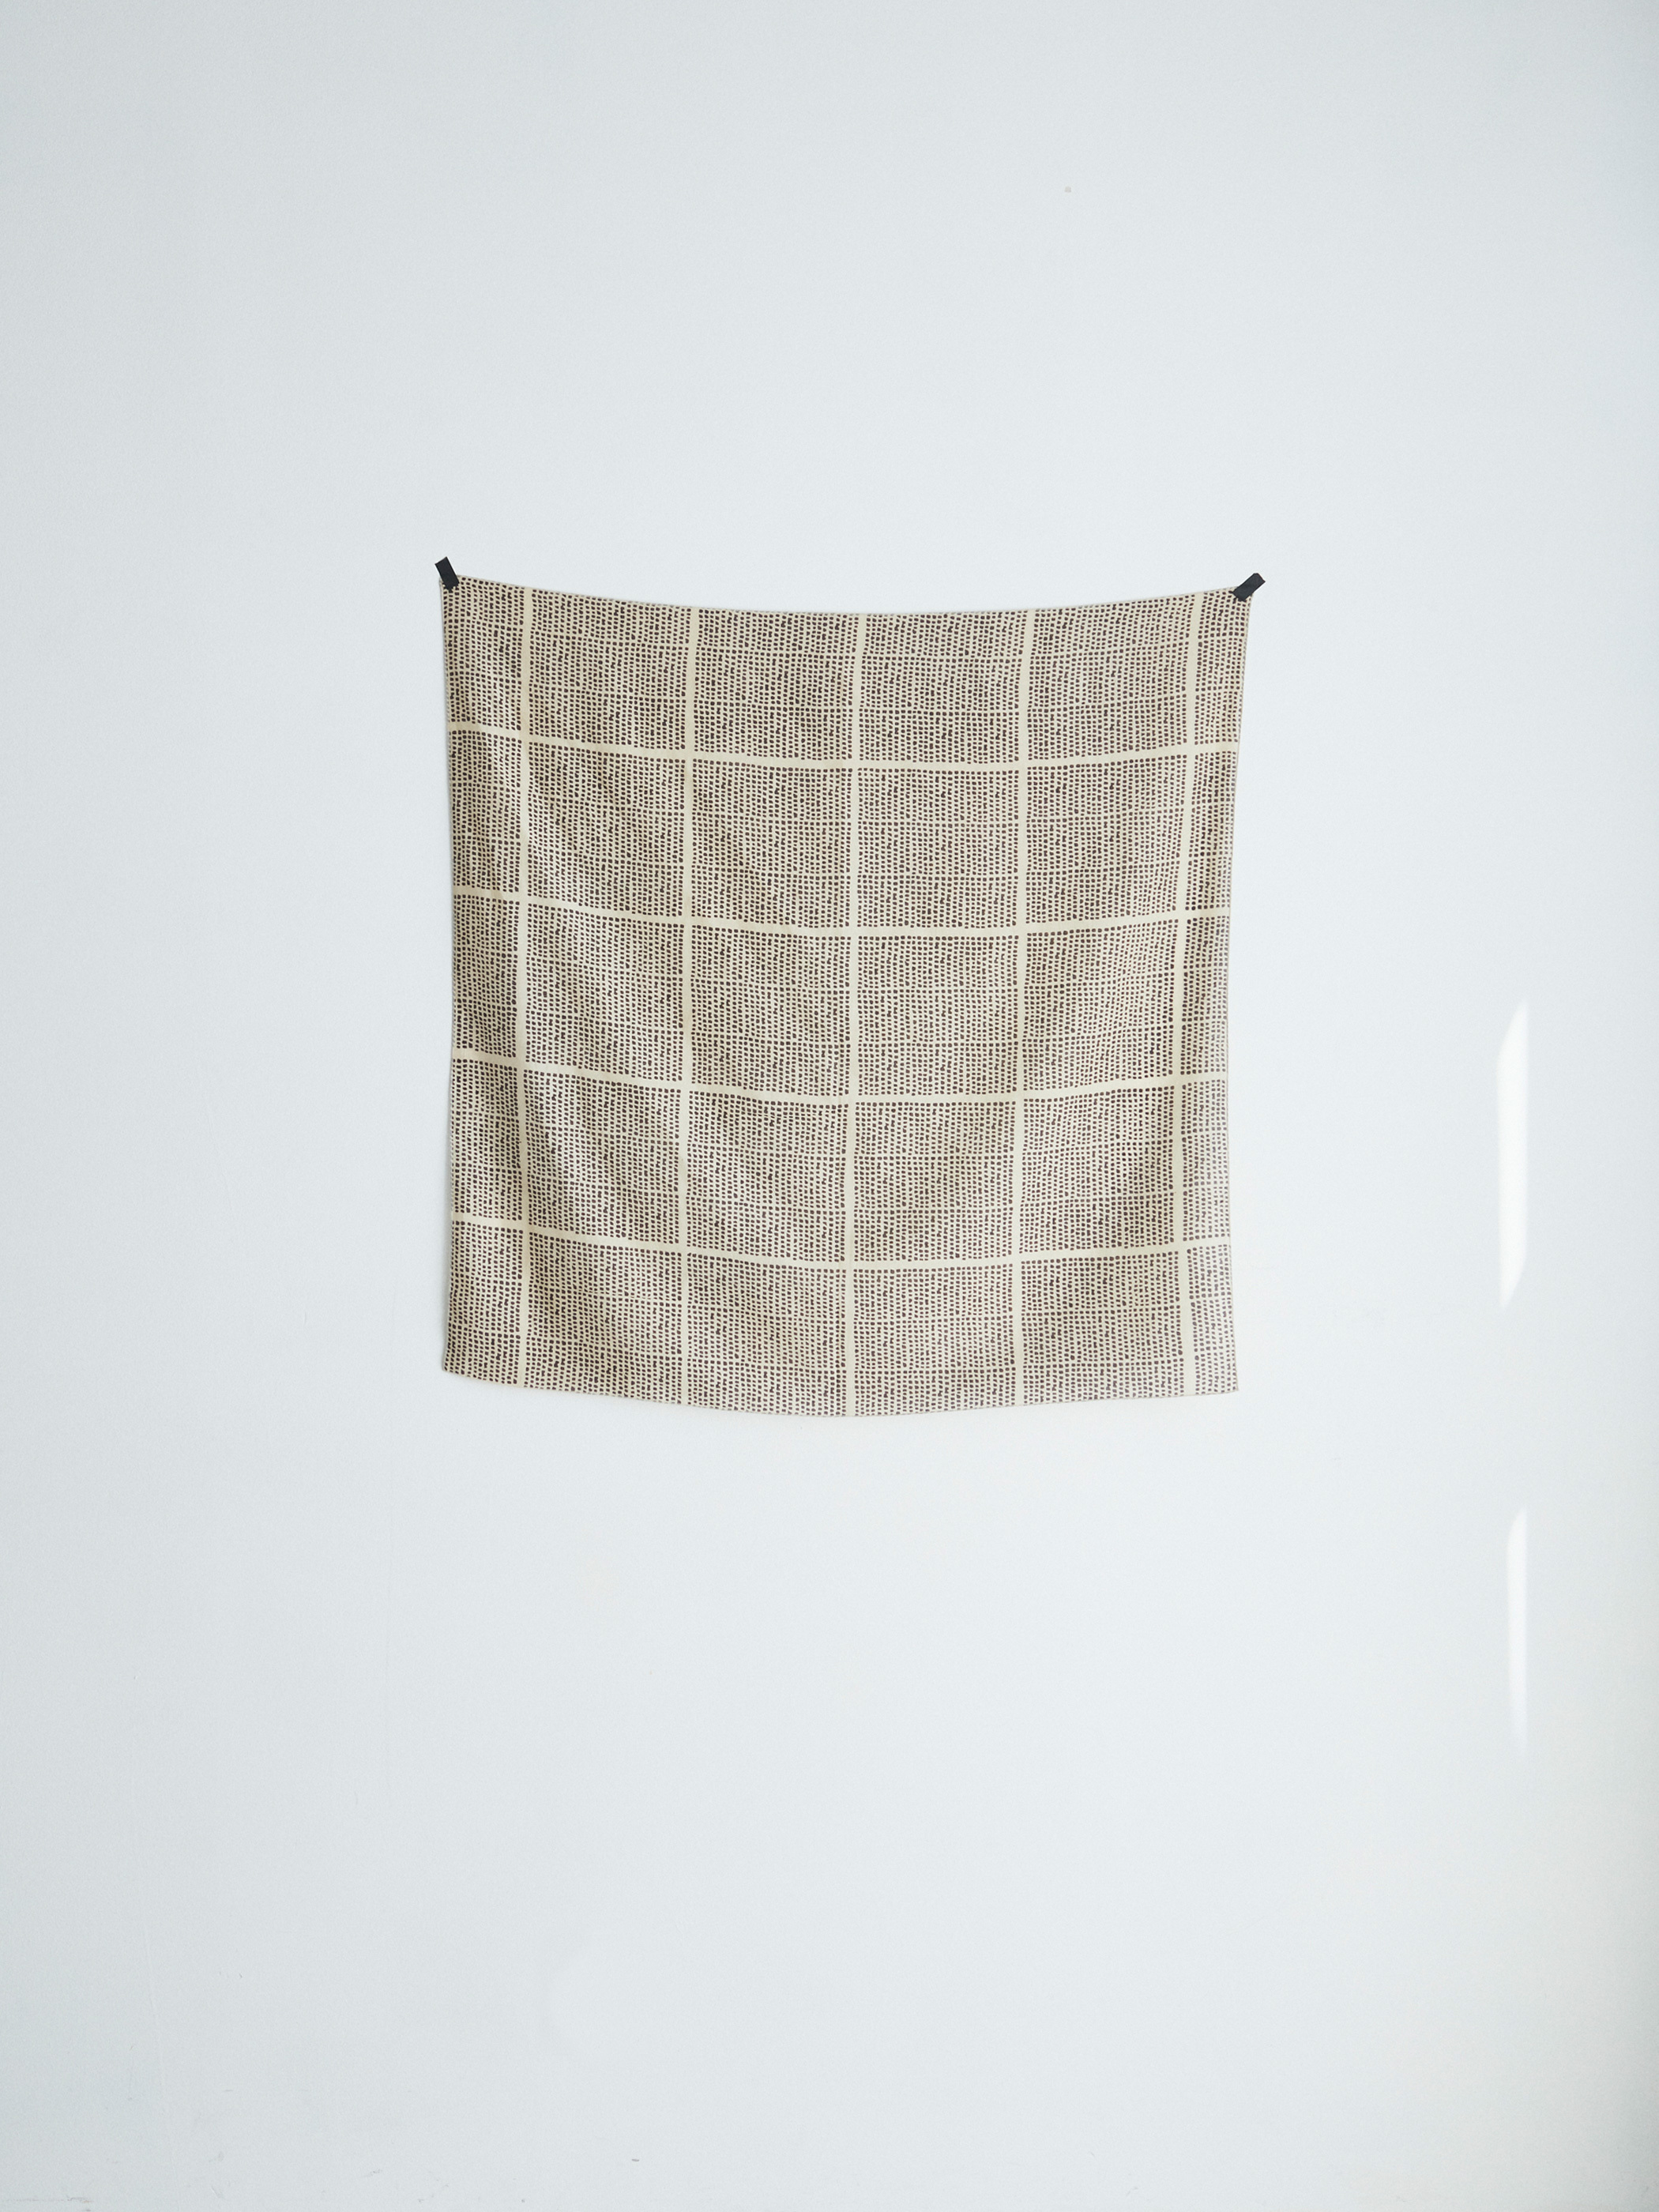 【 NEW 】 Seed check scarf -Cream-